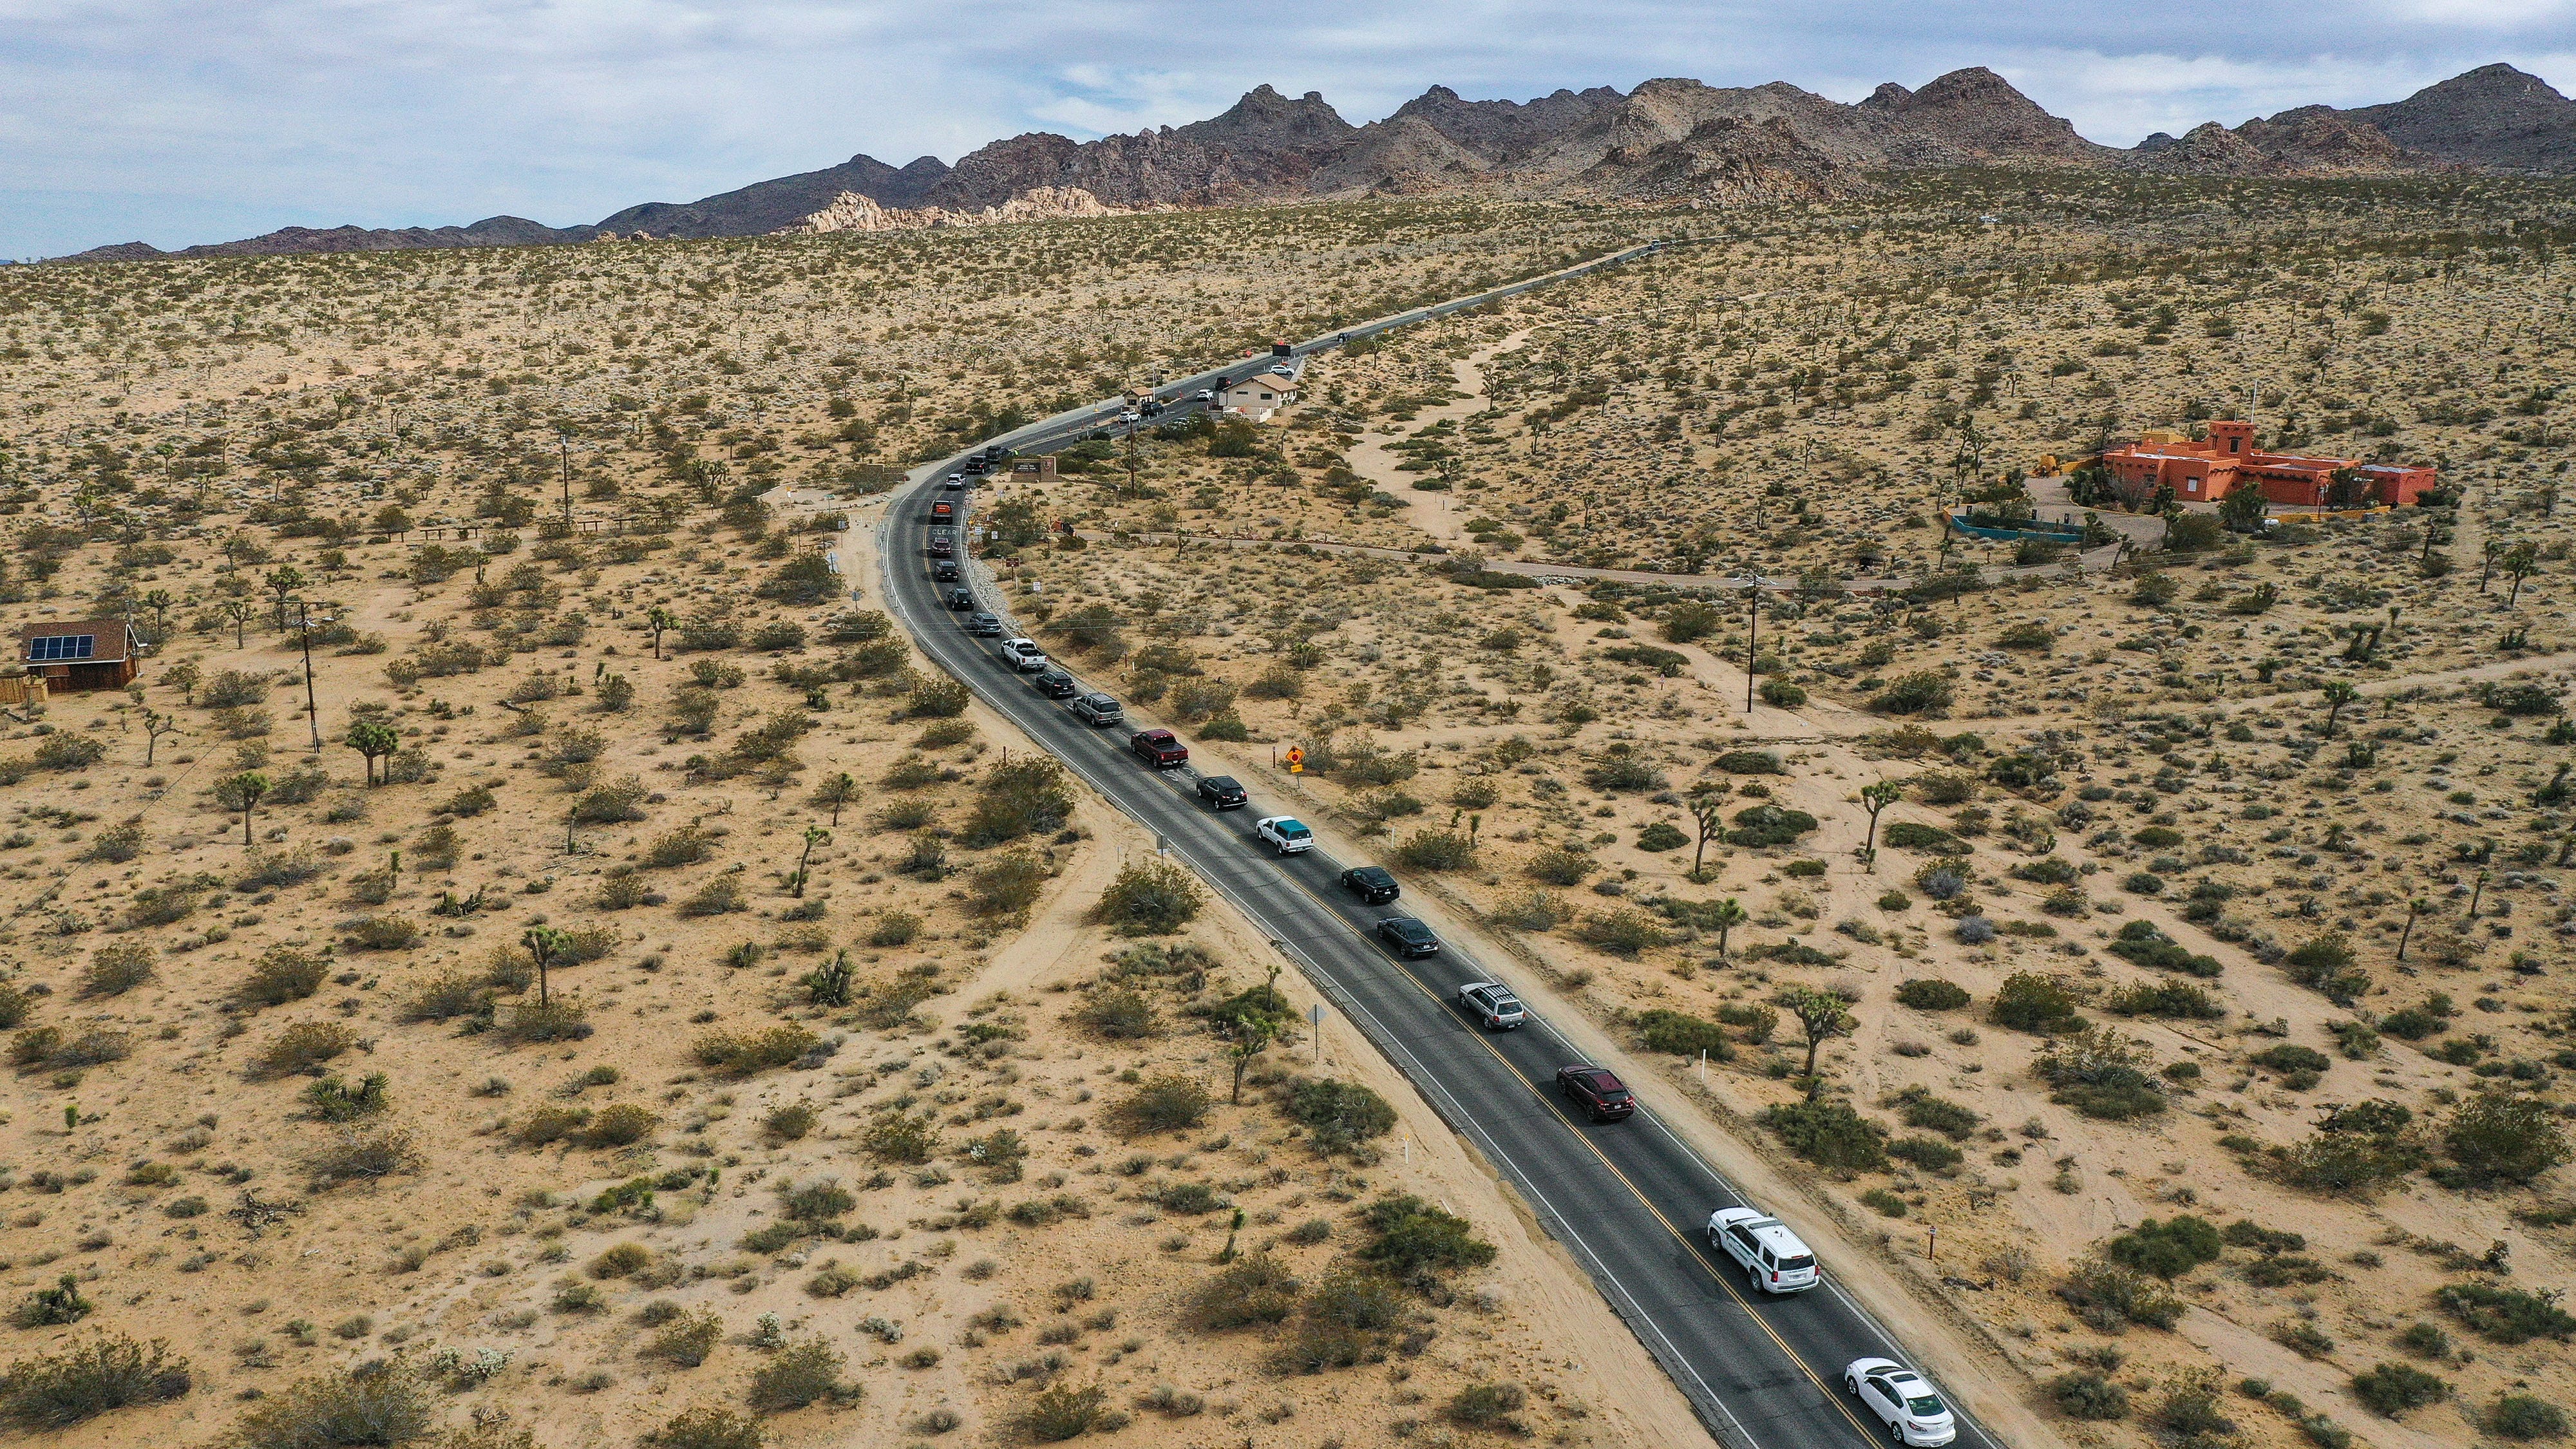 A long line of cars waits to get into Joshua Tree National Park on Jan. 14, 2022. Up to 40% of visitors make a day trip from the nearby Palm Springs area.